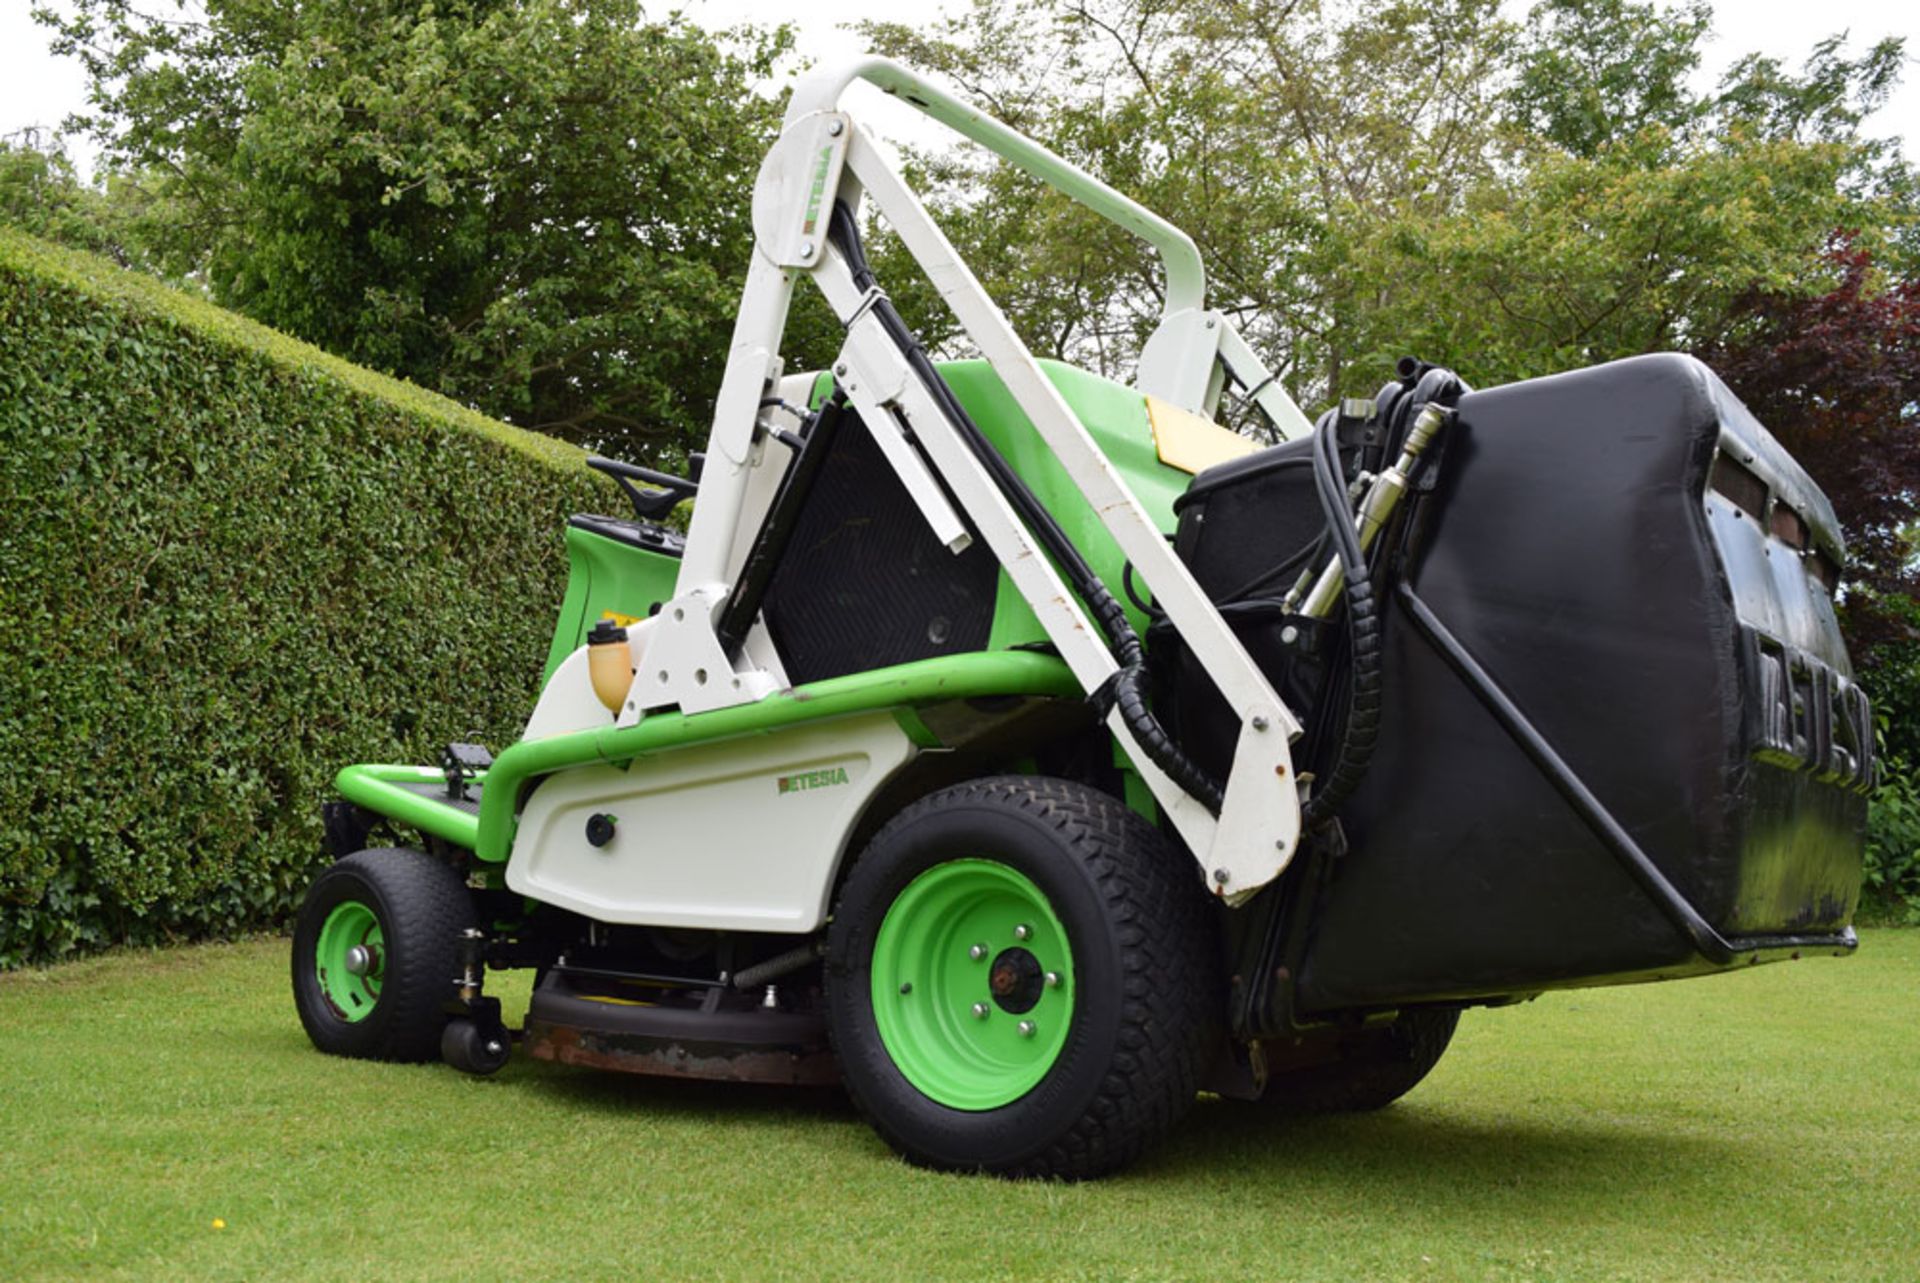 Etesia Hydro 124DS Ride On Rotary Mower - Image 9 of 15